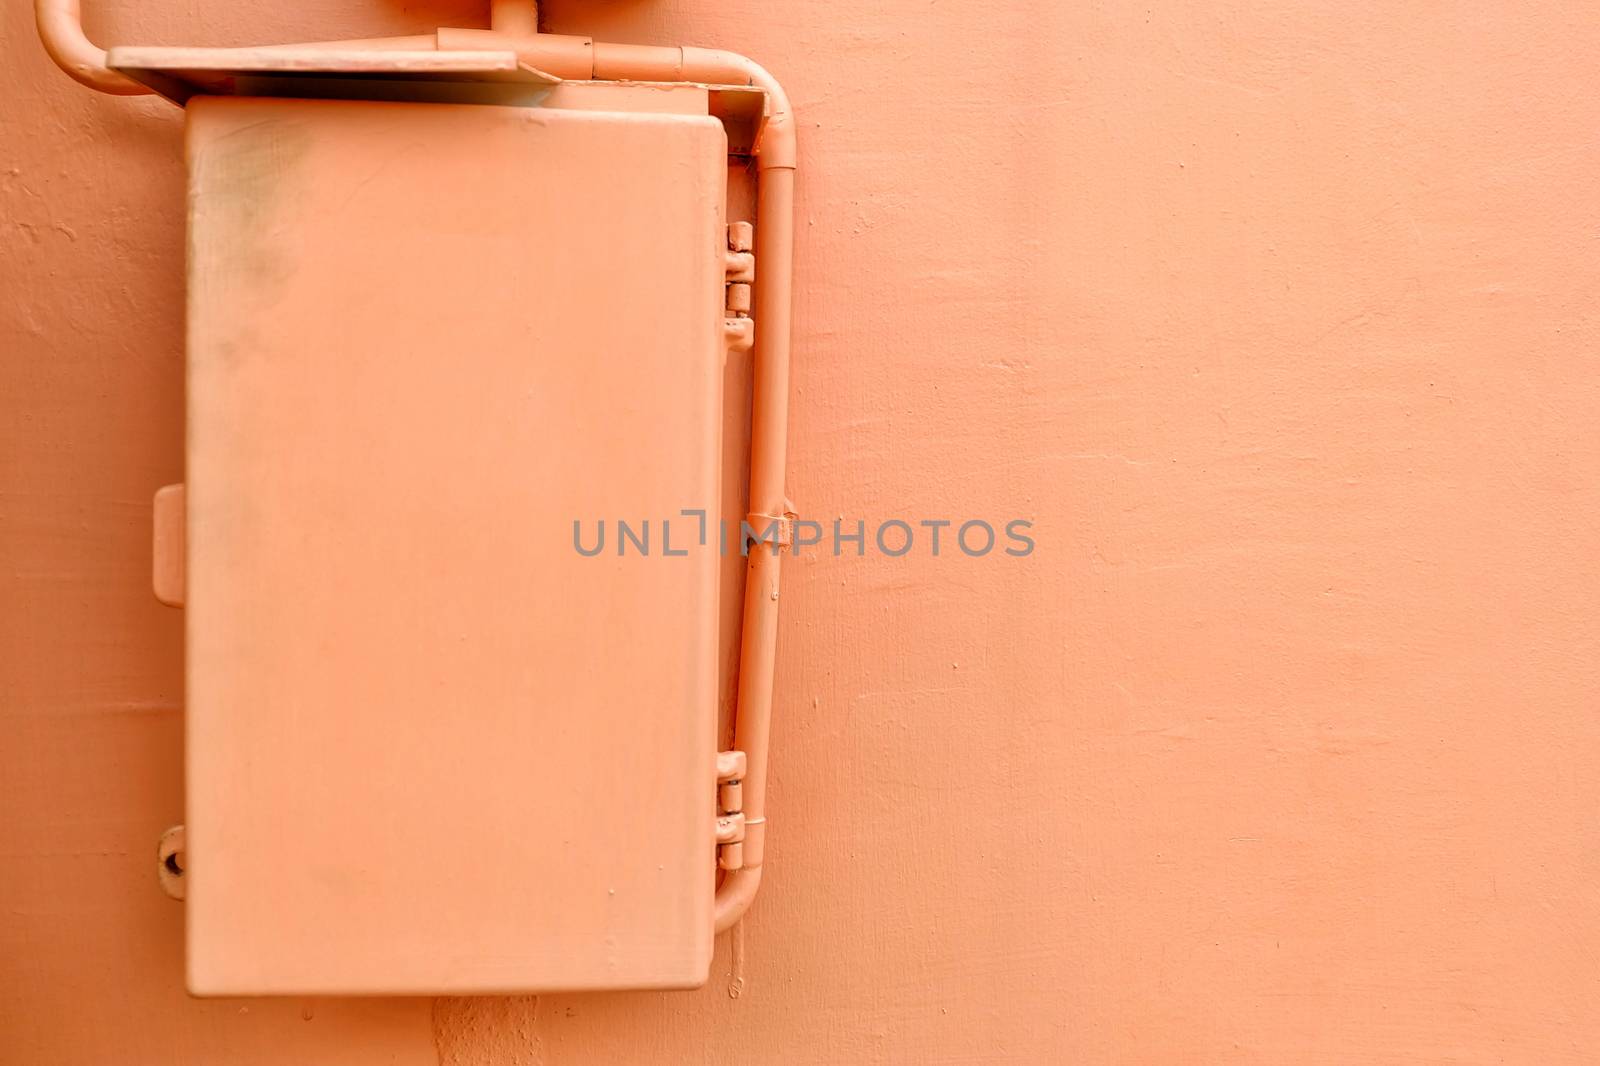 Electric Box with Flesh Tone Concrete Wall Background.